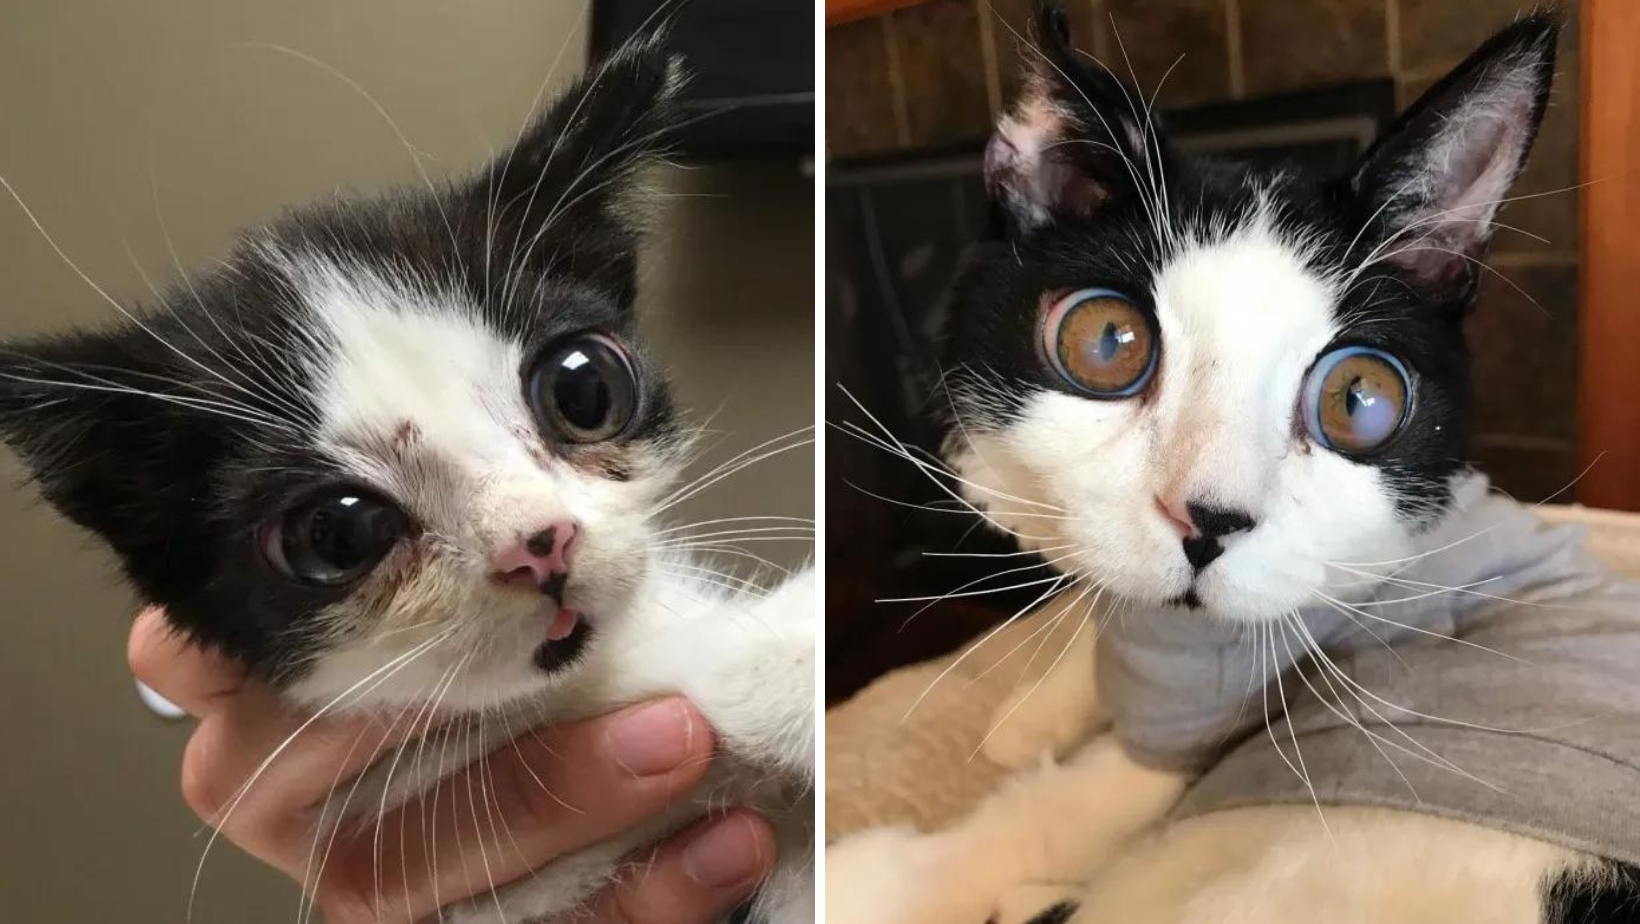 This Is Porg Adorable Big-Eyed Kitty Found Abandoned In A Box